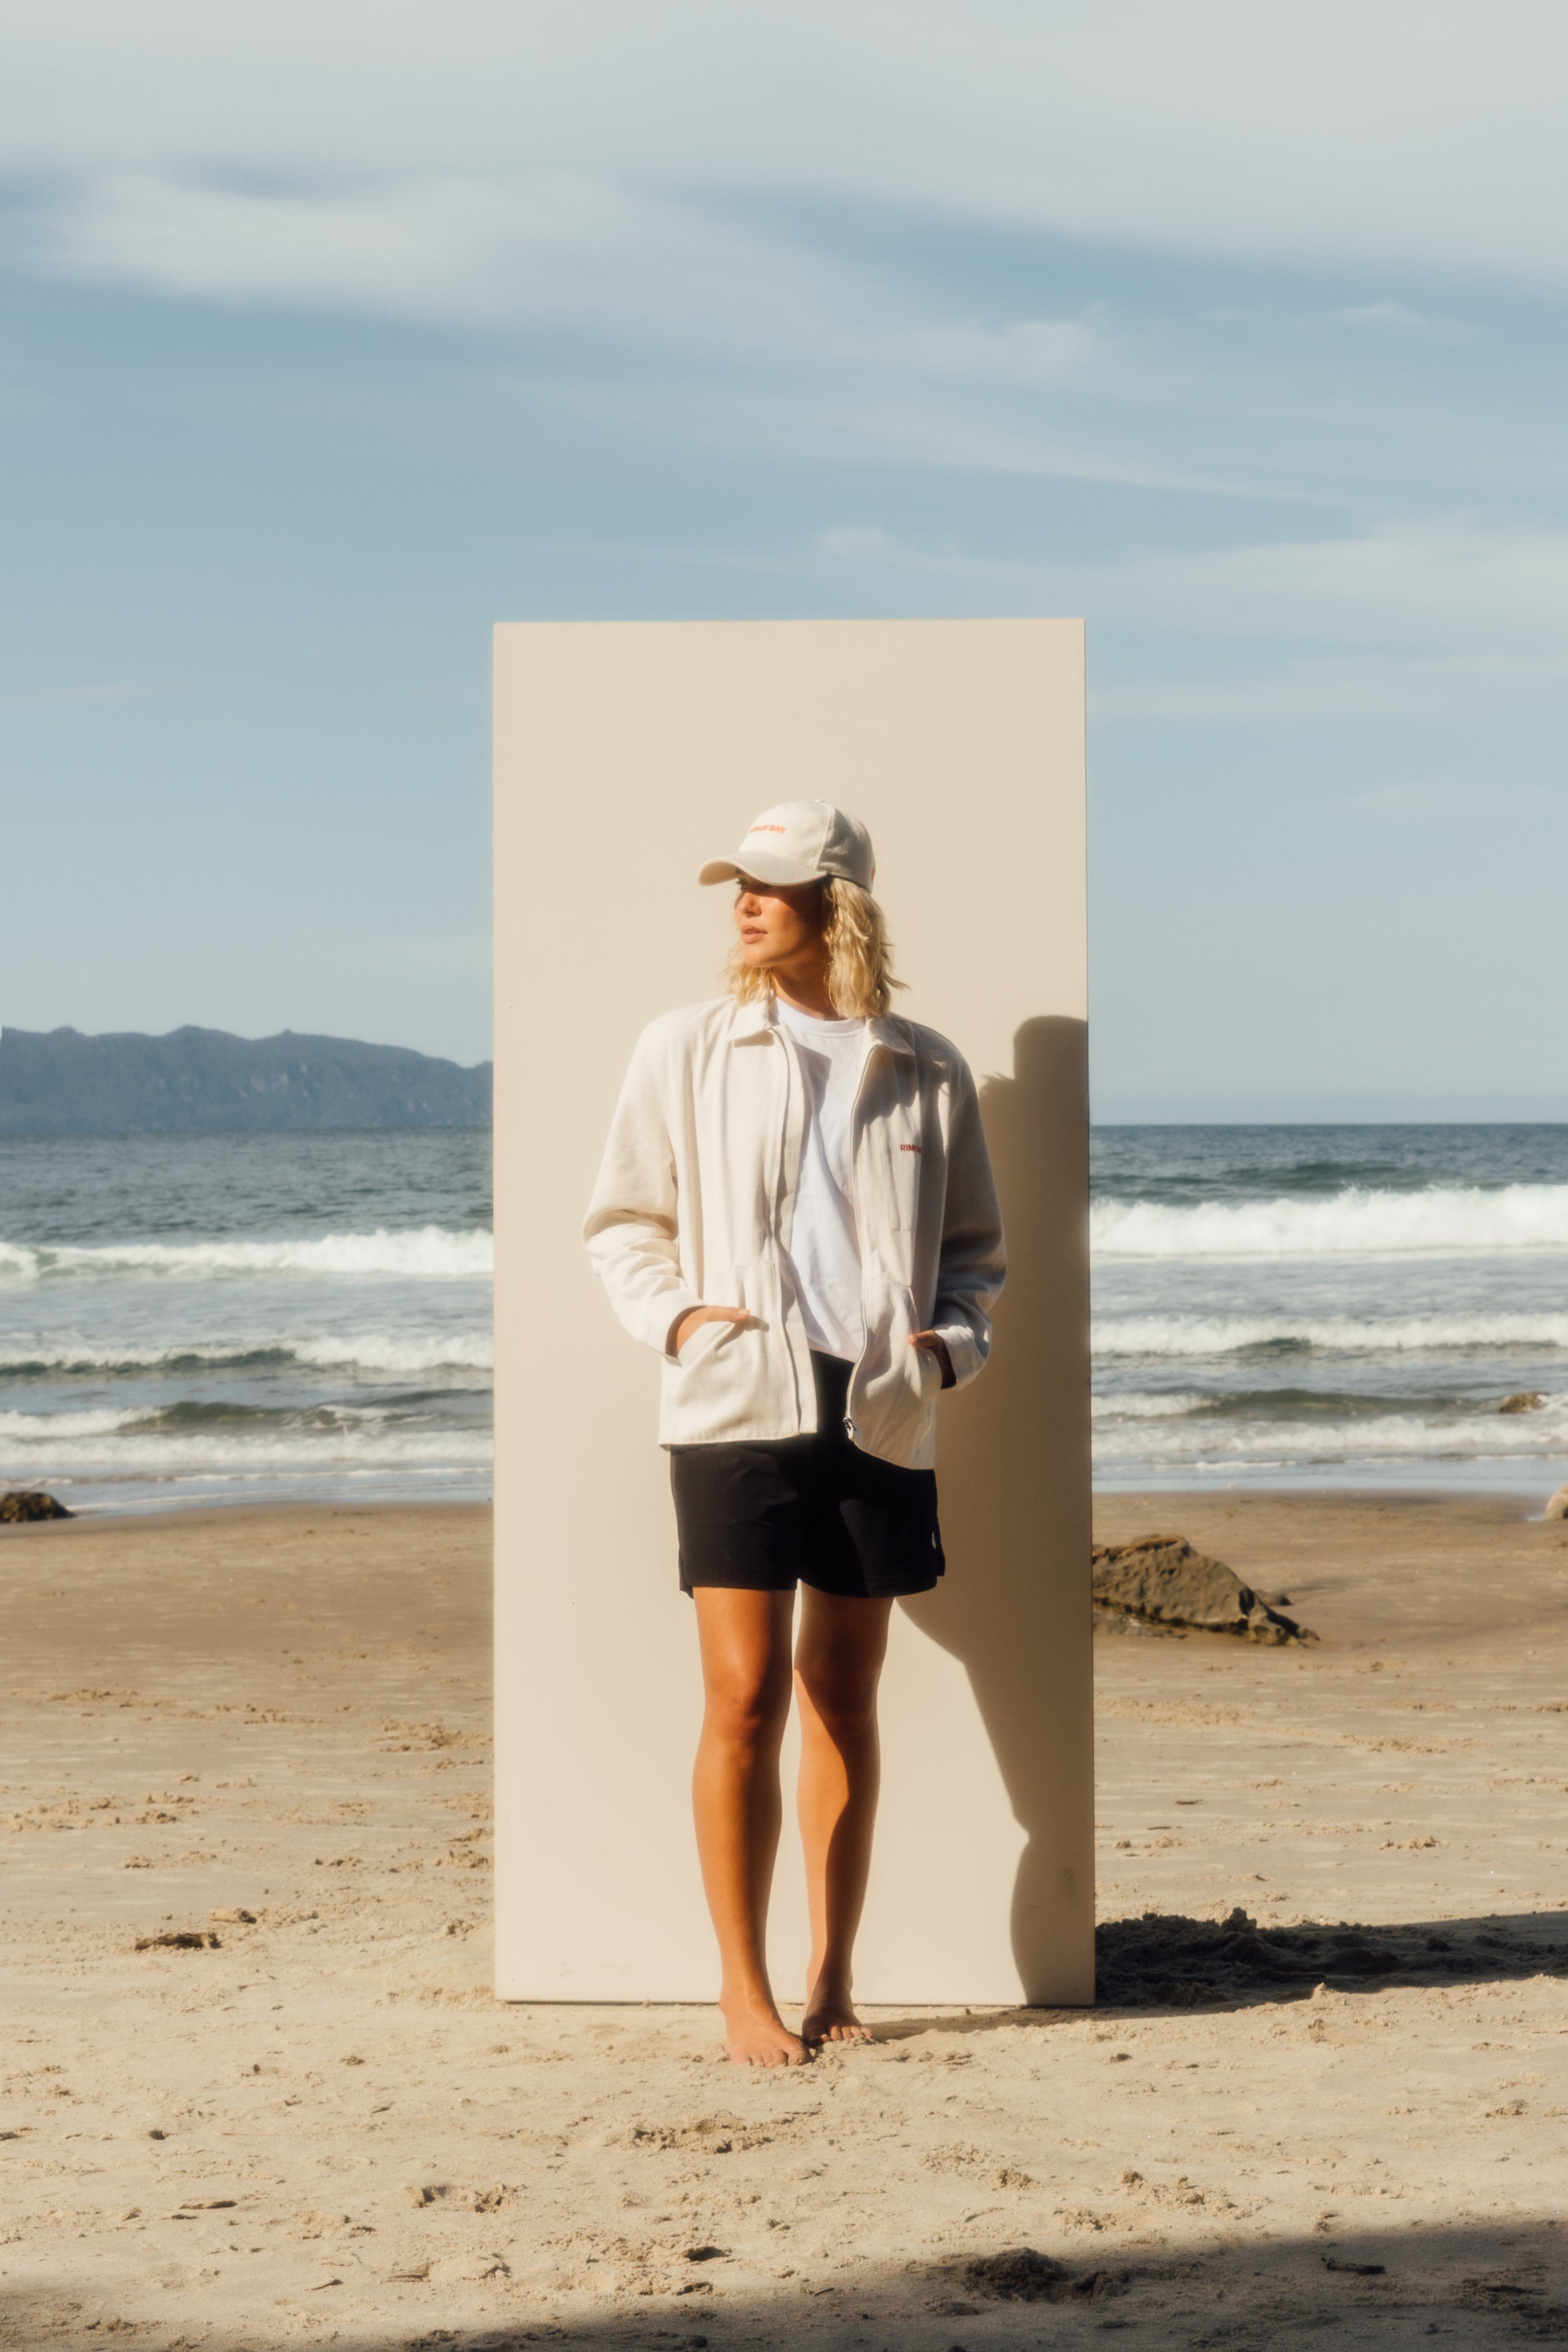 girl standing on beach in front of a beige board wearing beige hat, off white jacket, white tshirt, and black shorts